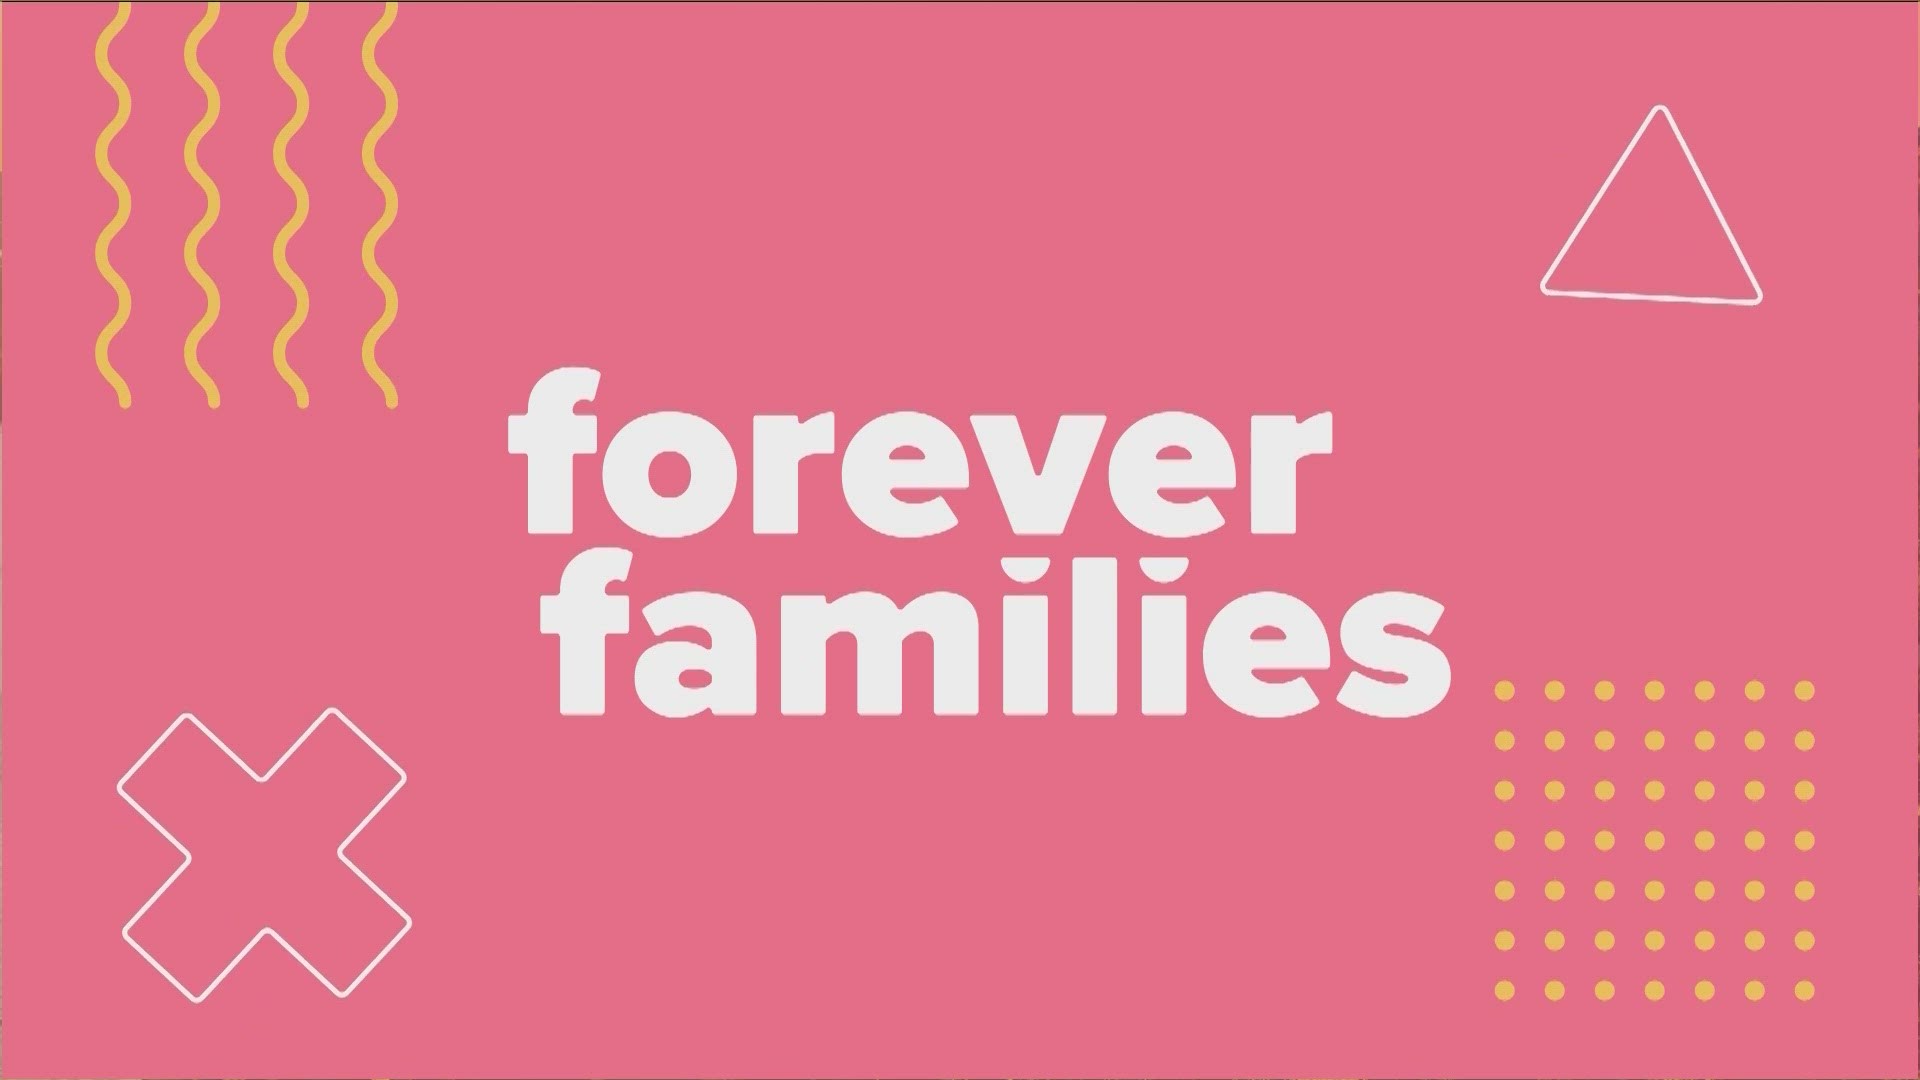 For this week's Forever Families, KVUE's Hannah Rucker sat down with a local adoption director who was able to answer some frequently asked questions about adoption.